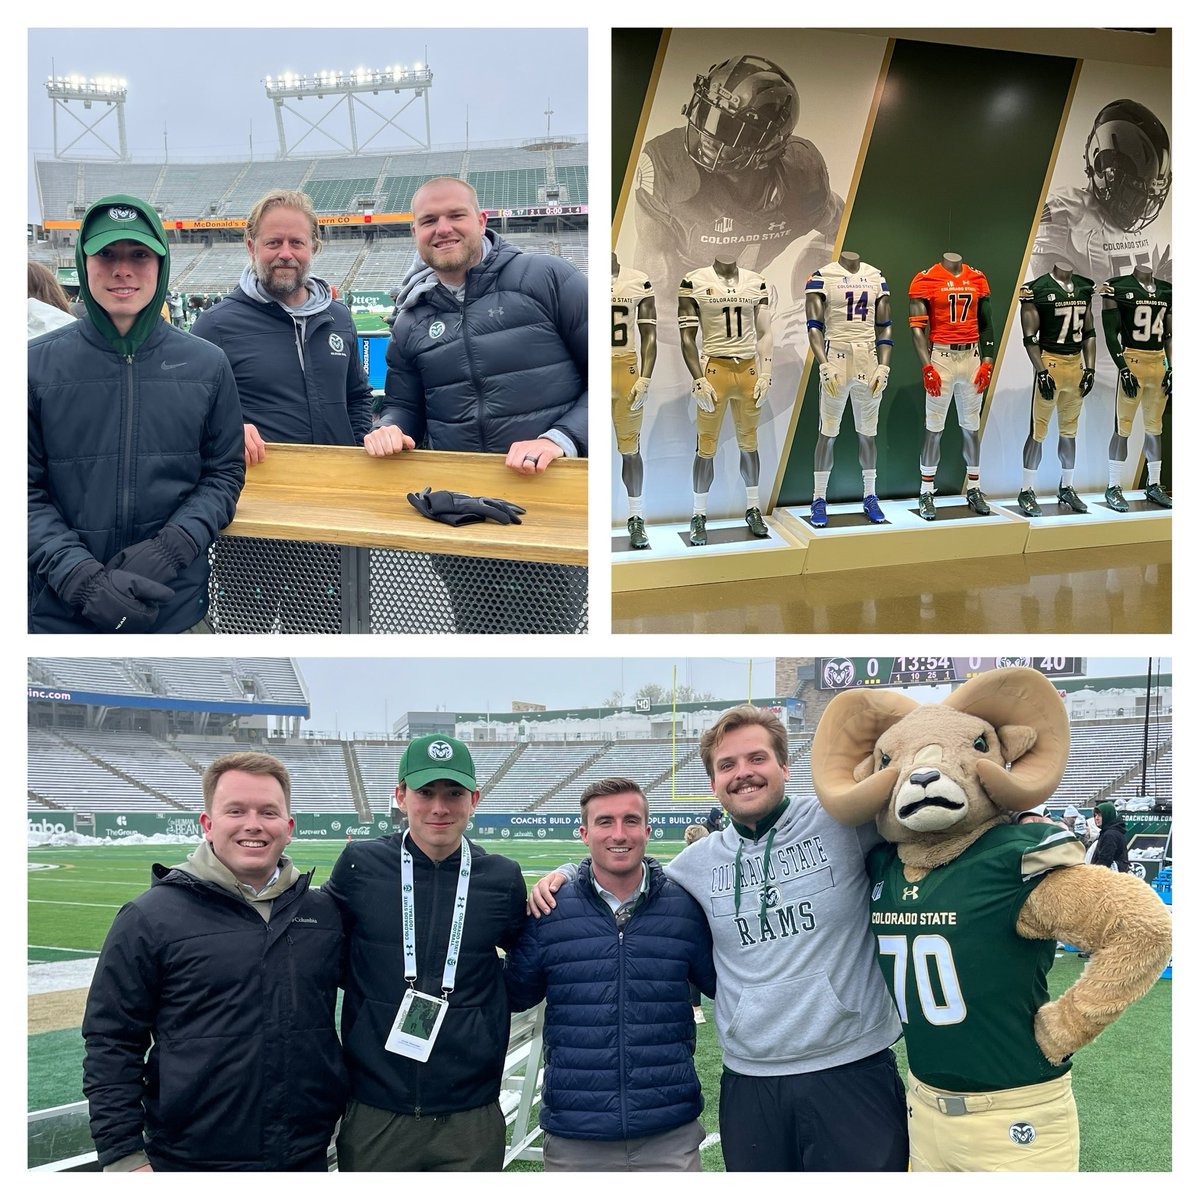 Had an awesome 2 day visit in Fort Collins with @CSUFootball Thanks to @CO_CoachPerry @Coach_TGilliam & the recruiting staff for having me and showing me around the facility. Excited to be back this summer. #CSURams @DawsonEagleFB @RecruitTheNest @HKA_Tanalski @hershbrothersk1